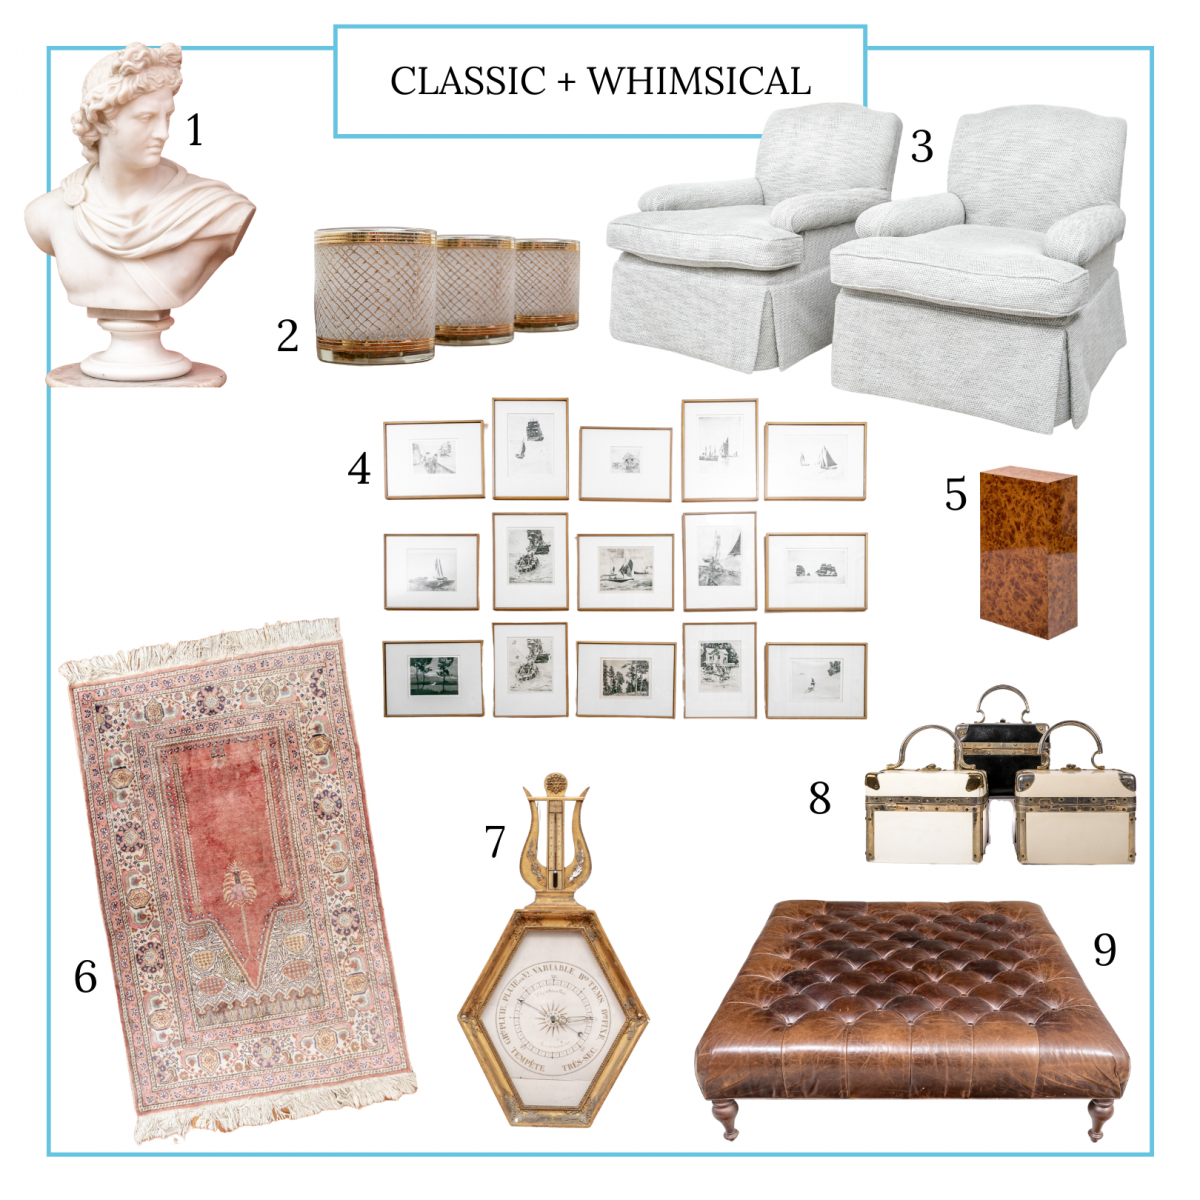 Nine assorted items make up Jocelyn's curation including a pair of upholstered armchairs, classic style bust, Persian rug, leather tufted ottoman, works of art and other decorative arts.